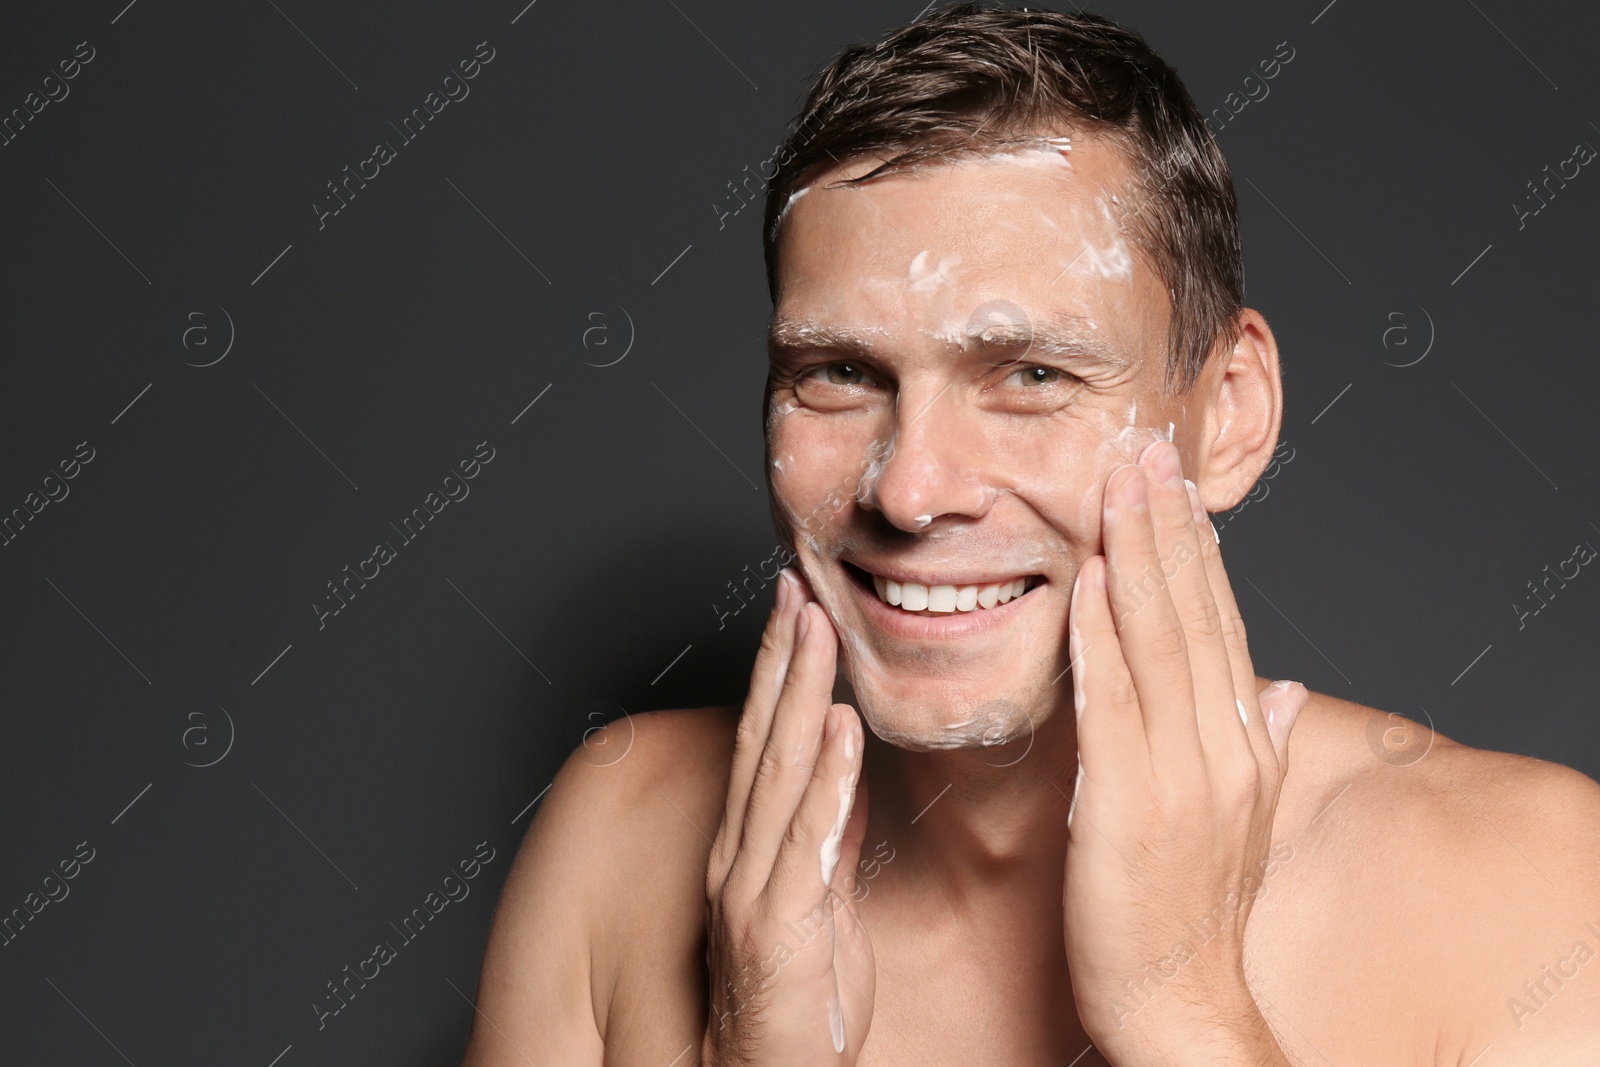 Photo of Man washing face with soap on dark background